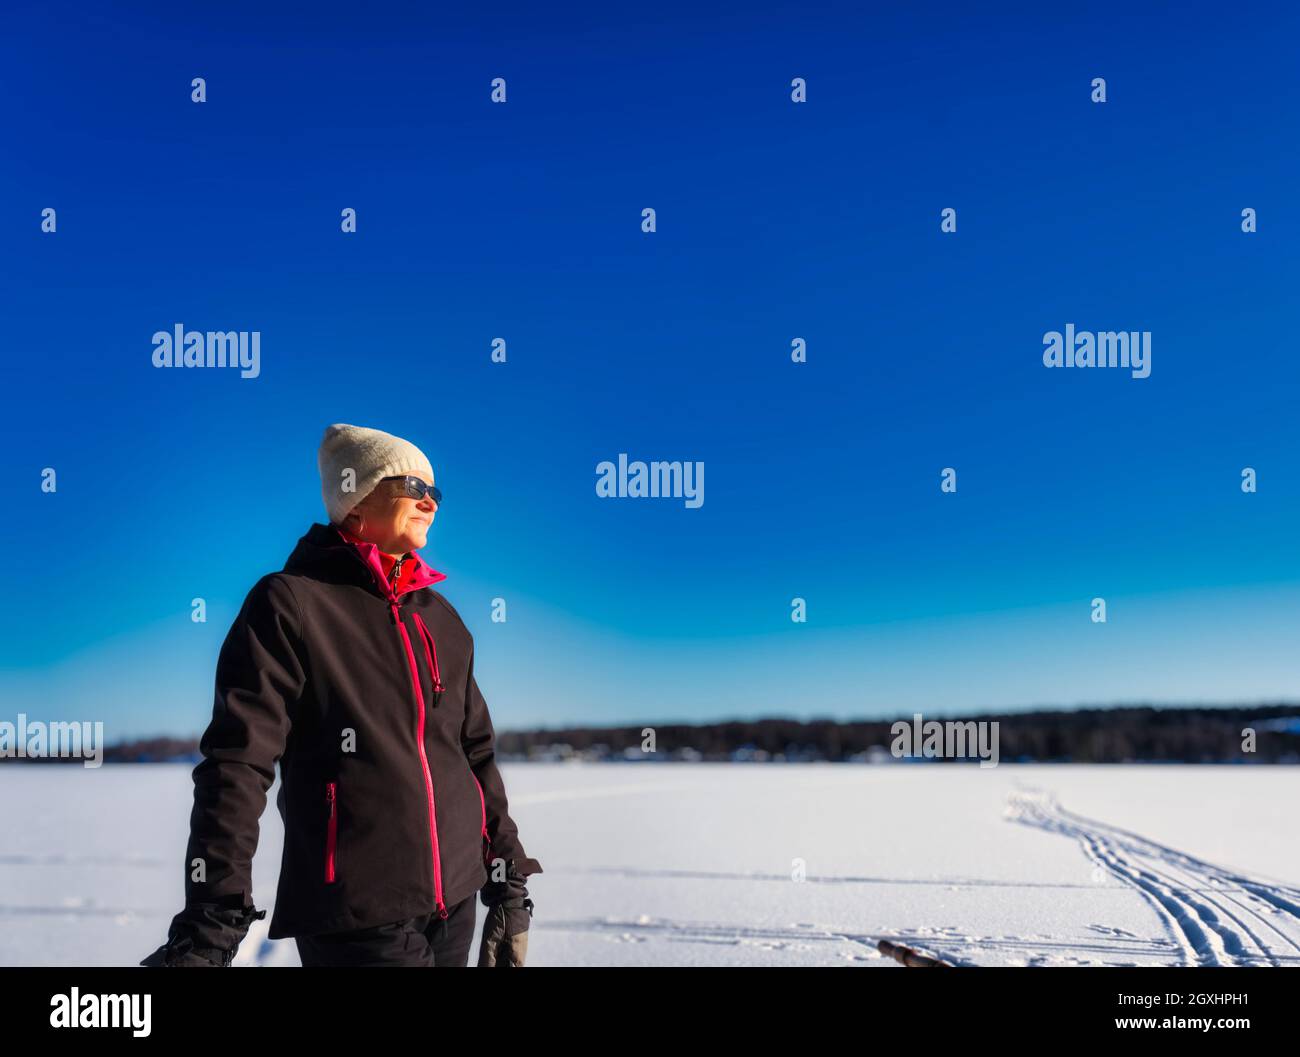 Winter dressed woman standing on a frozen lake with clear blue sky Stock Photo